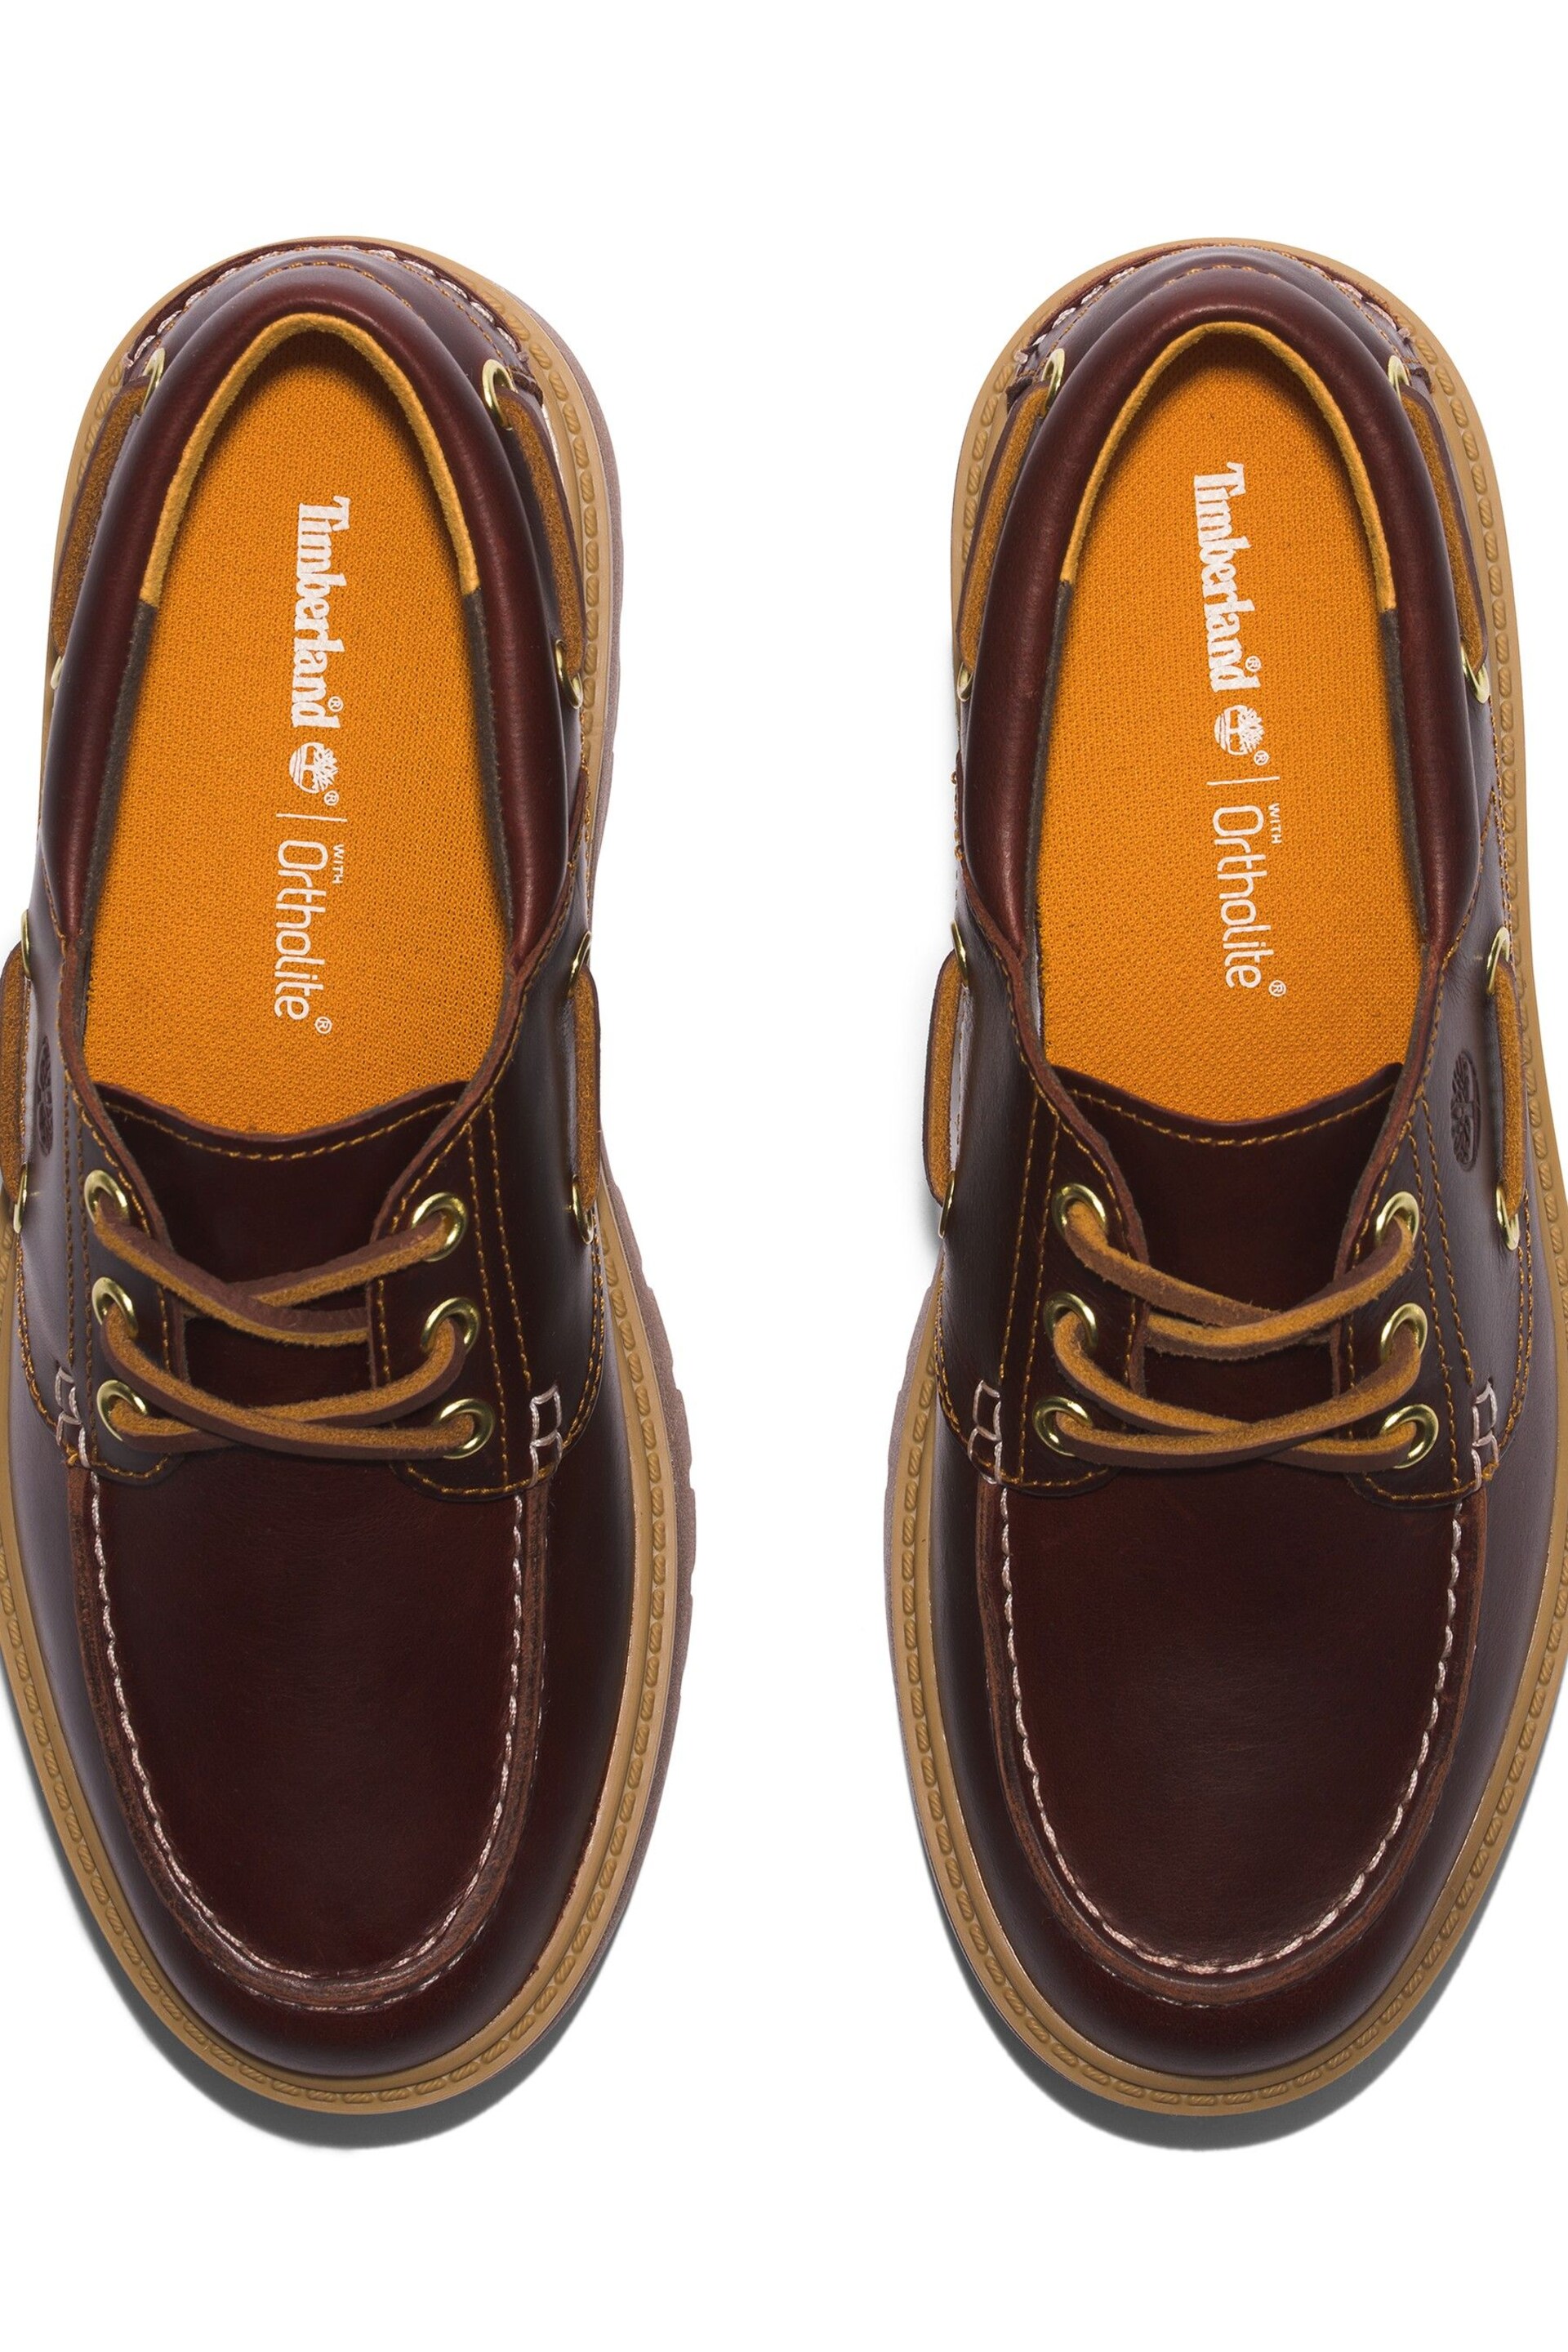 Timberland Street Boat Brown Shoes - Image 5 of 7